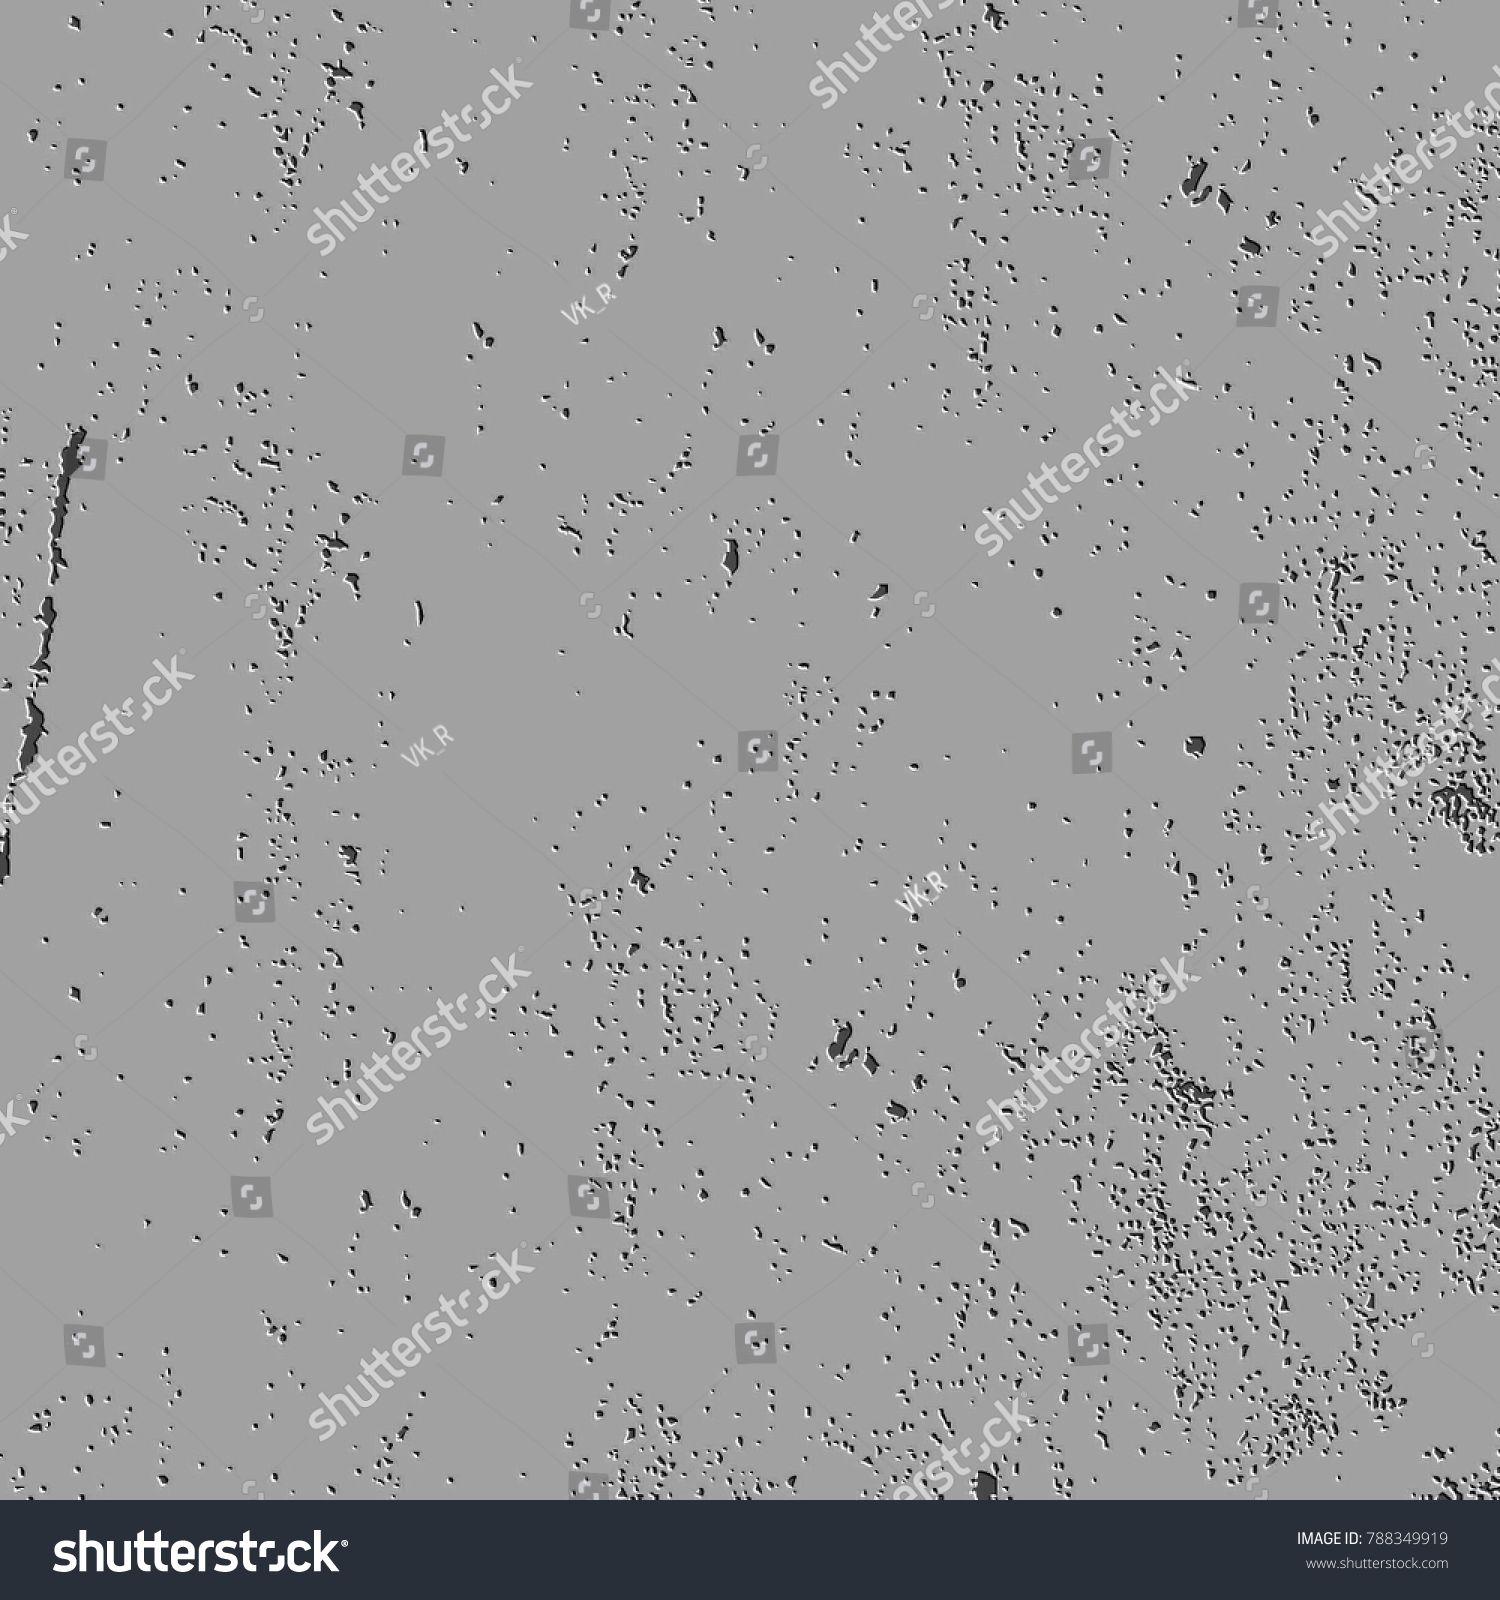 Abstract black and white texture. Dark chaotic background. Pattern from diverse elements of grunge style. Old dirty vintage modern surface #788349919